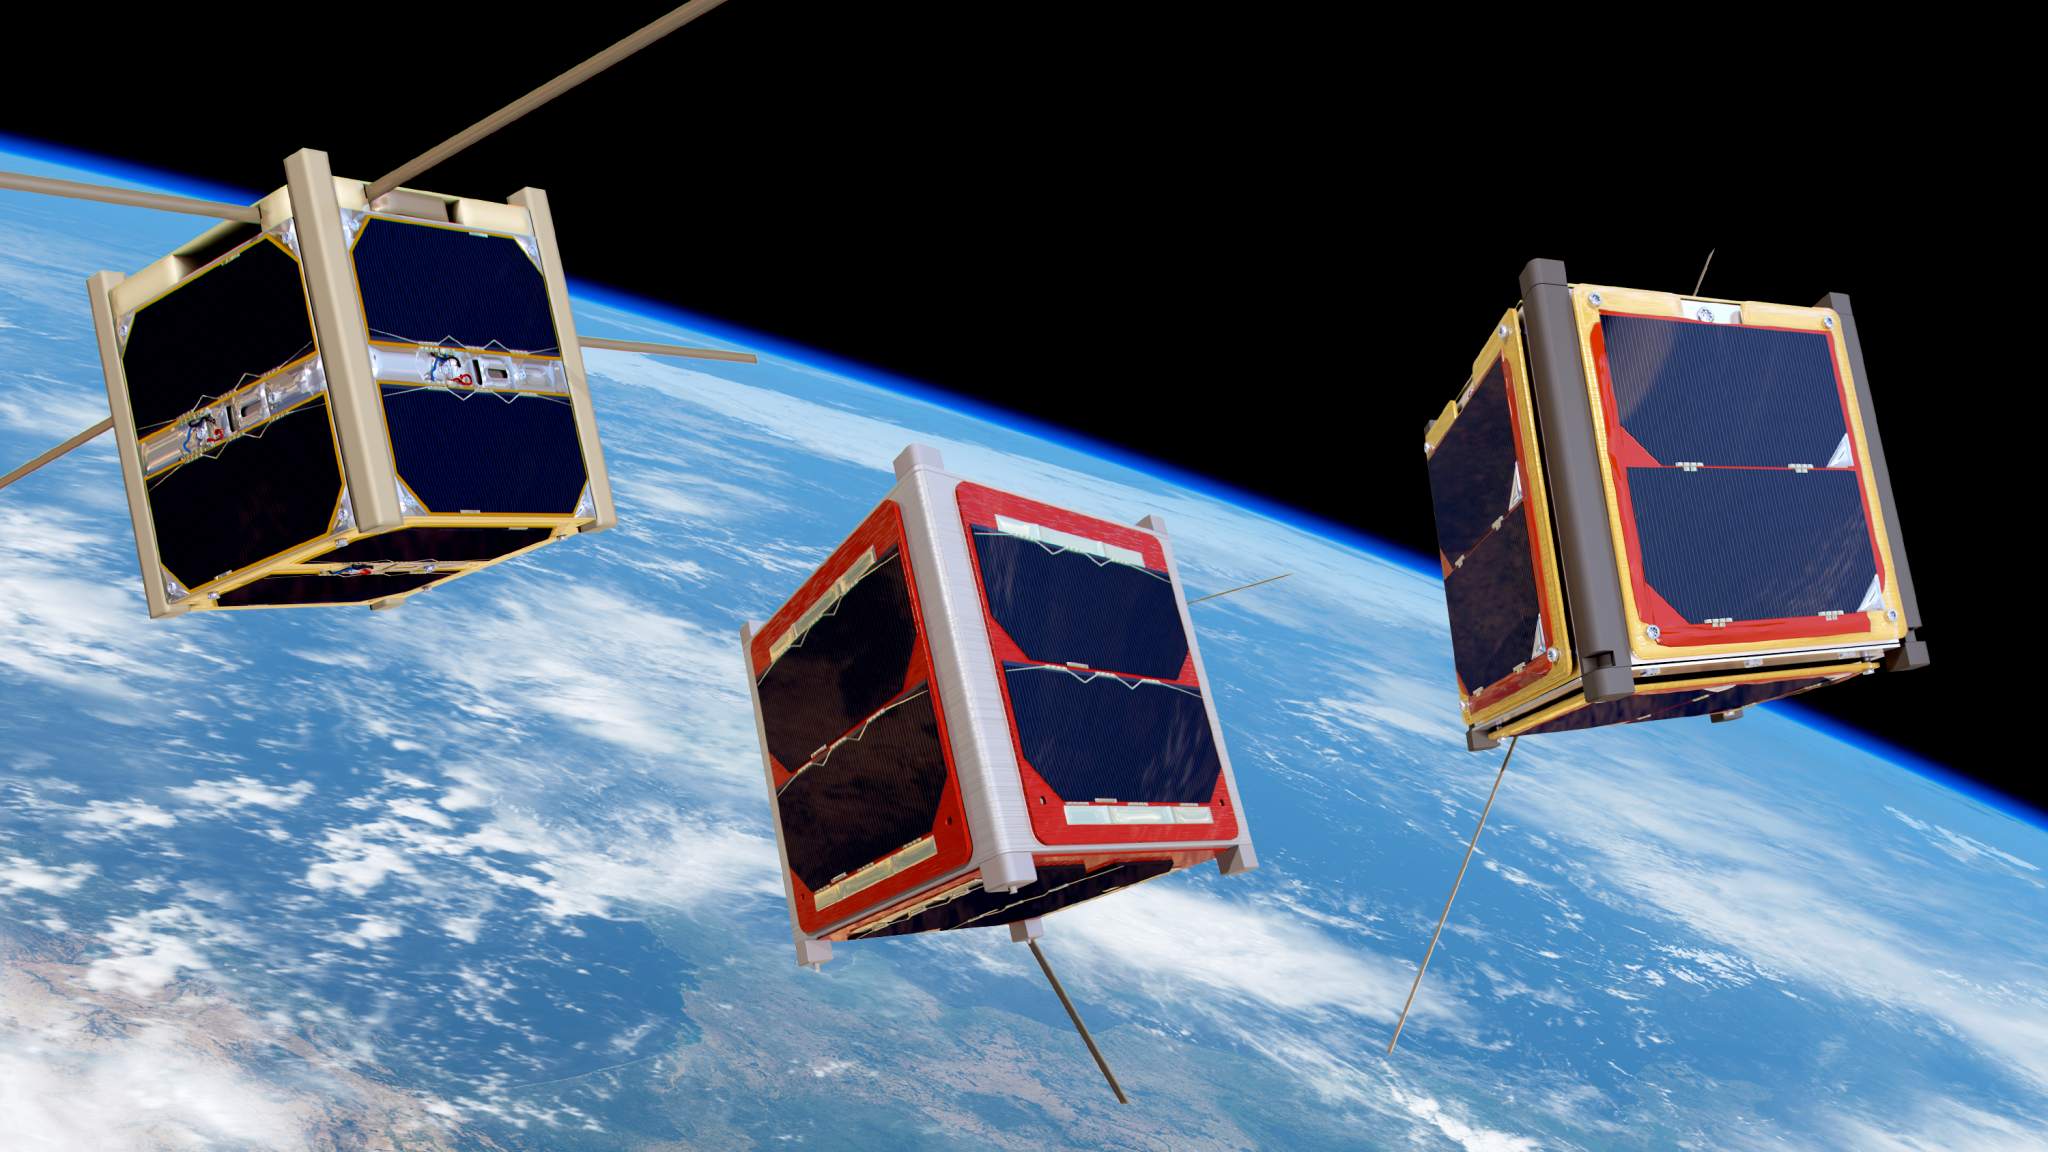 An artist's impression of Cubesats in orbit of the earth. Photo via ESA/Medialab.